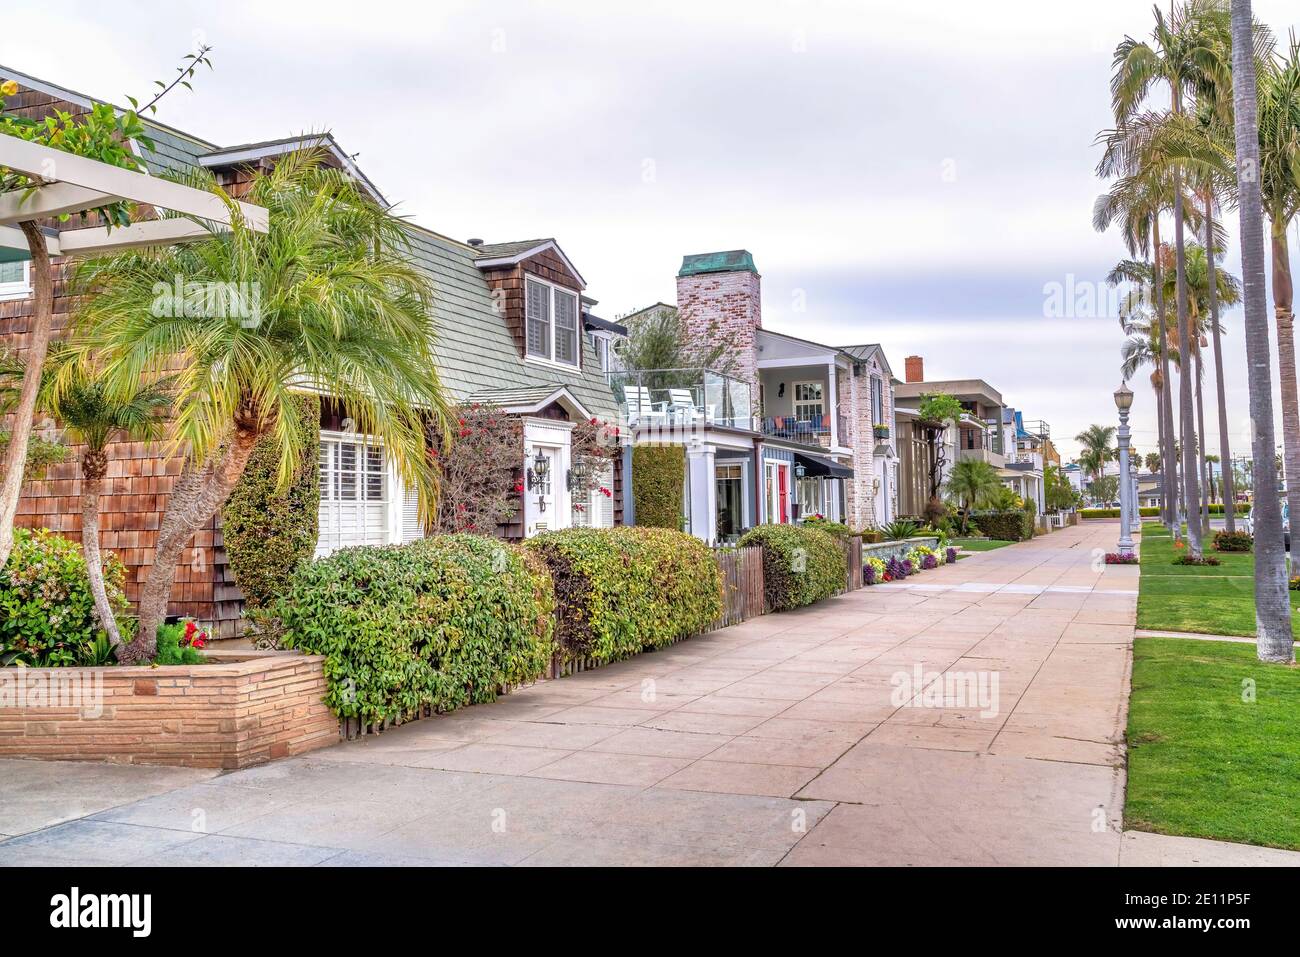 https://c8.alamy.com/comp/2E11P5F/charming-town-in-long-beach-california-with-houses-on-palm-tree-lined-street-2E11P5F.jpg